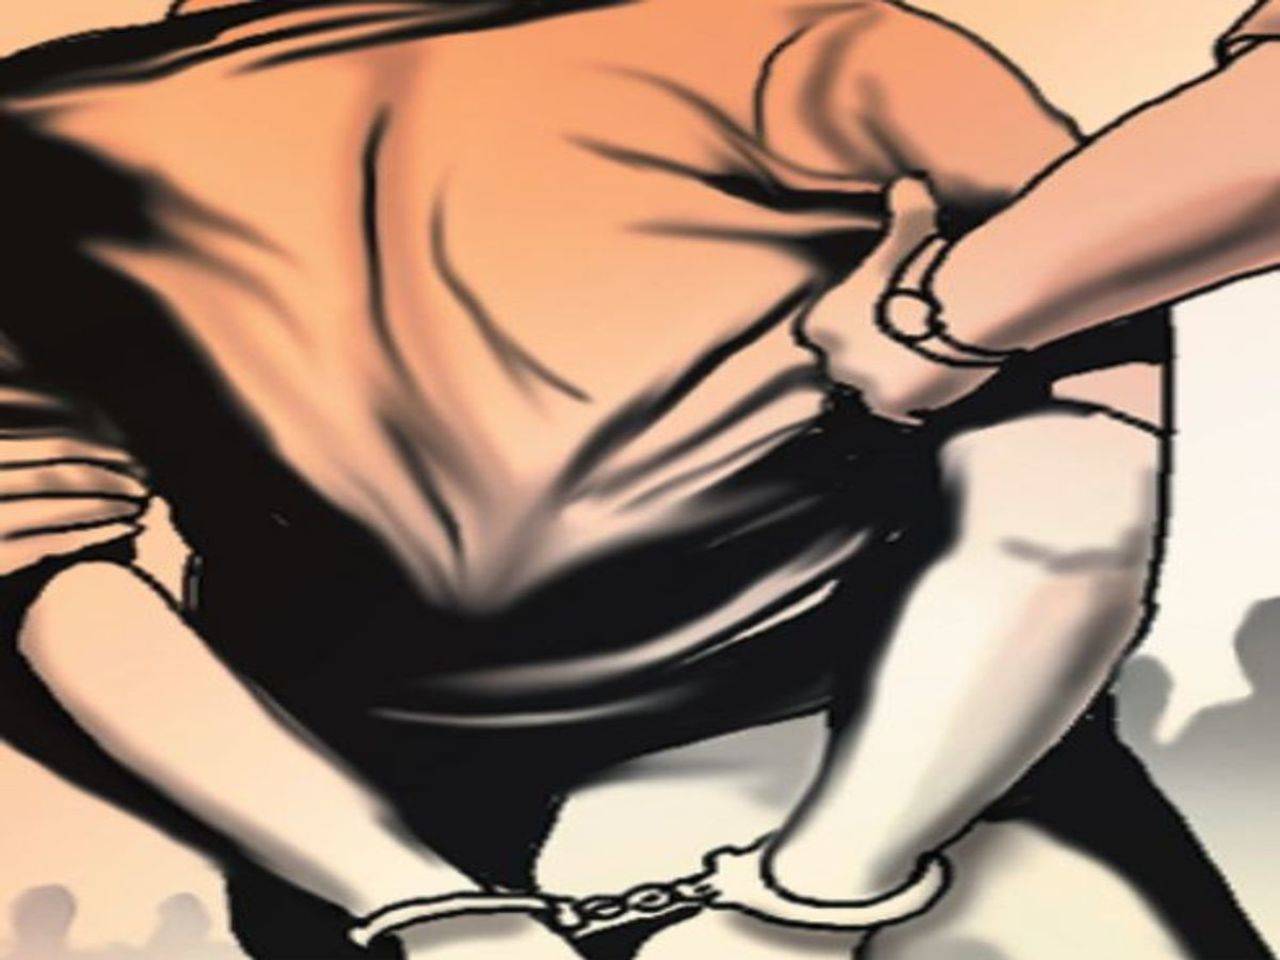 Tamil Nadu Boy, 17, held for sexually harassing 10-year-old girl Coimbatore News picture